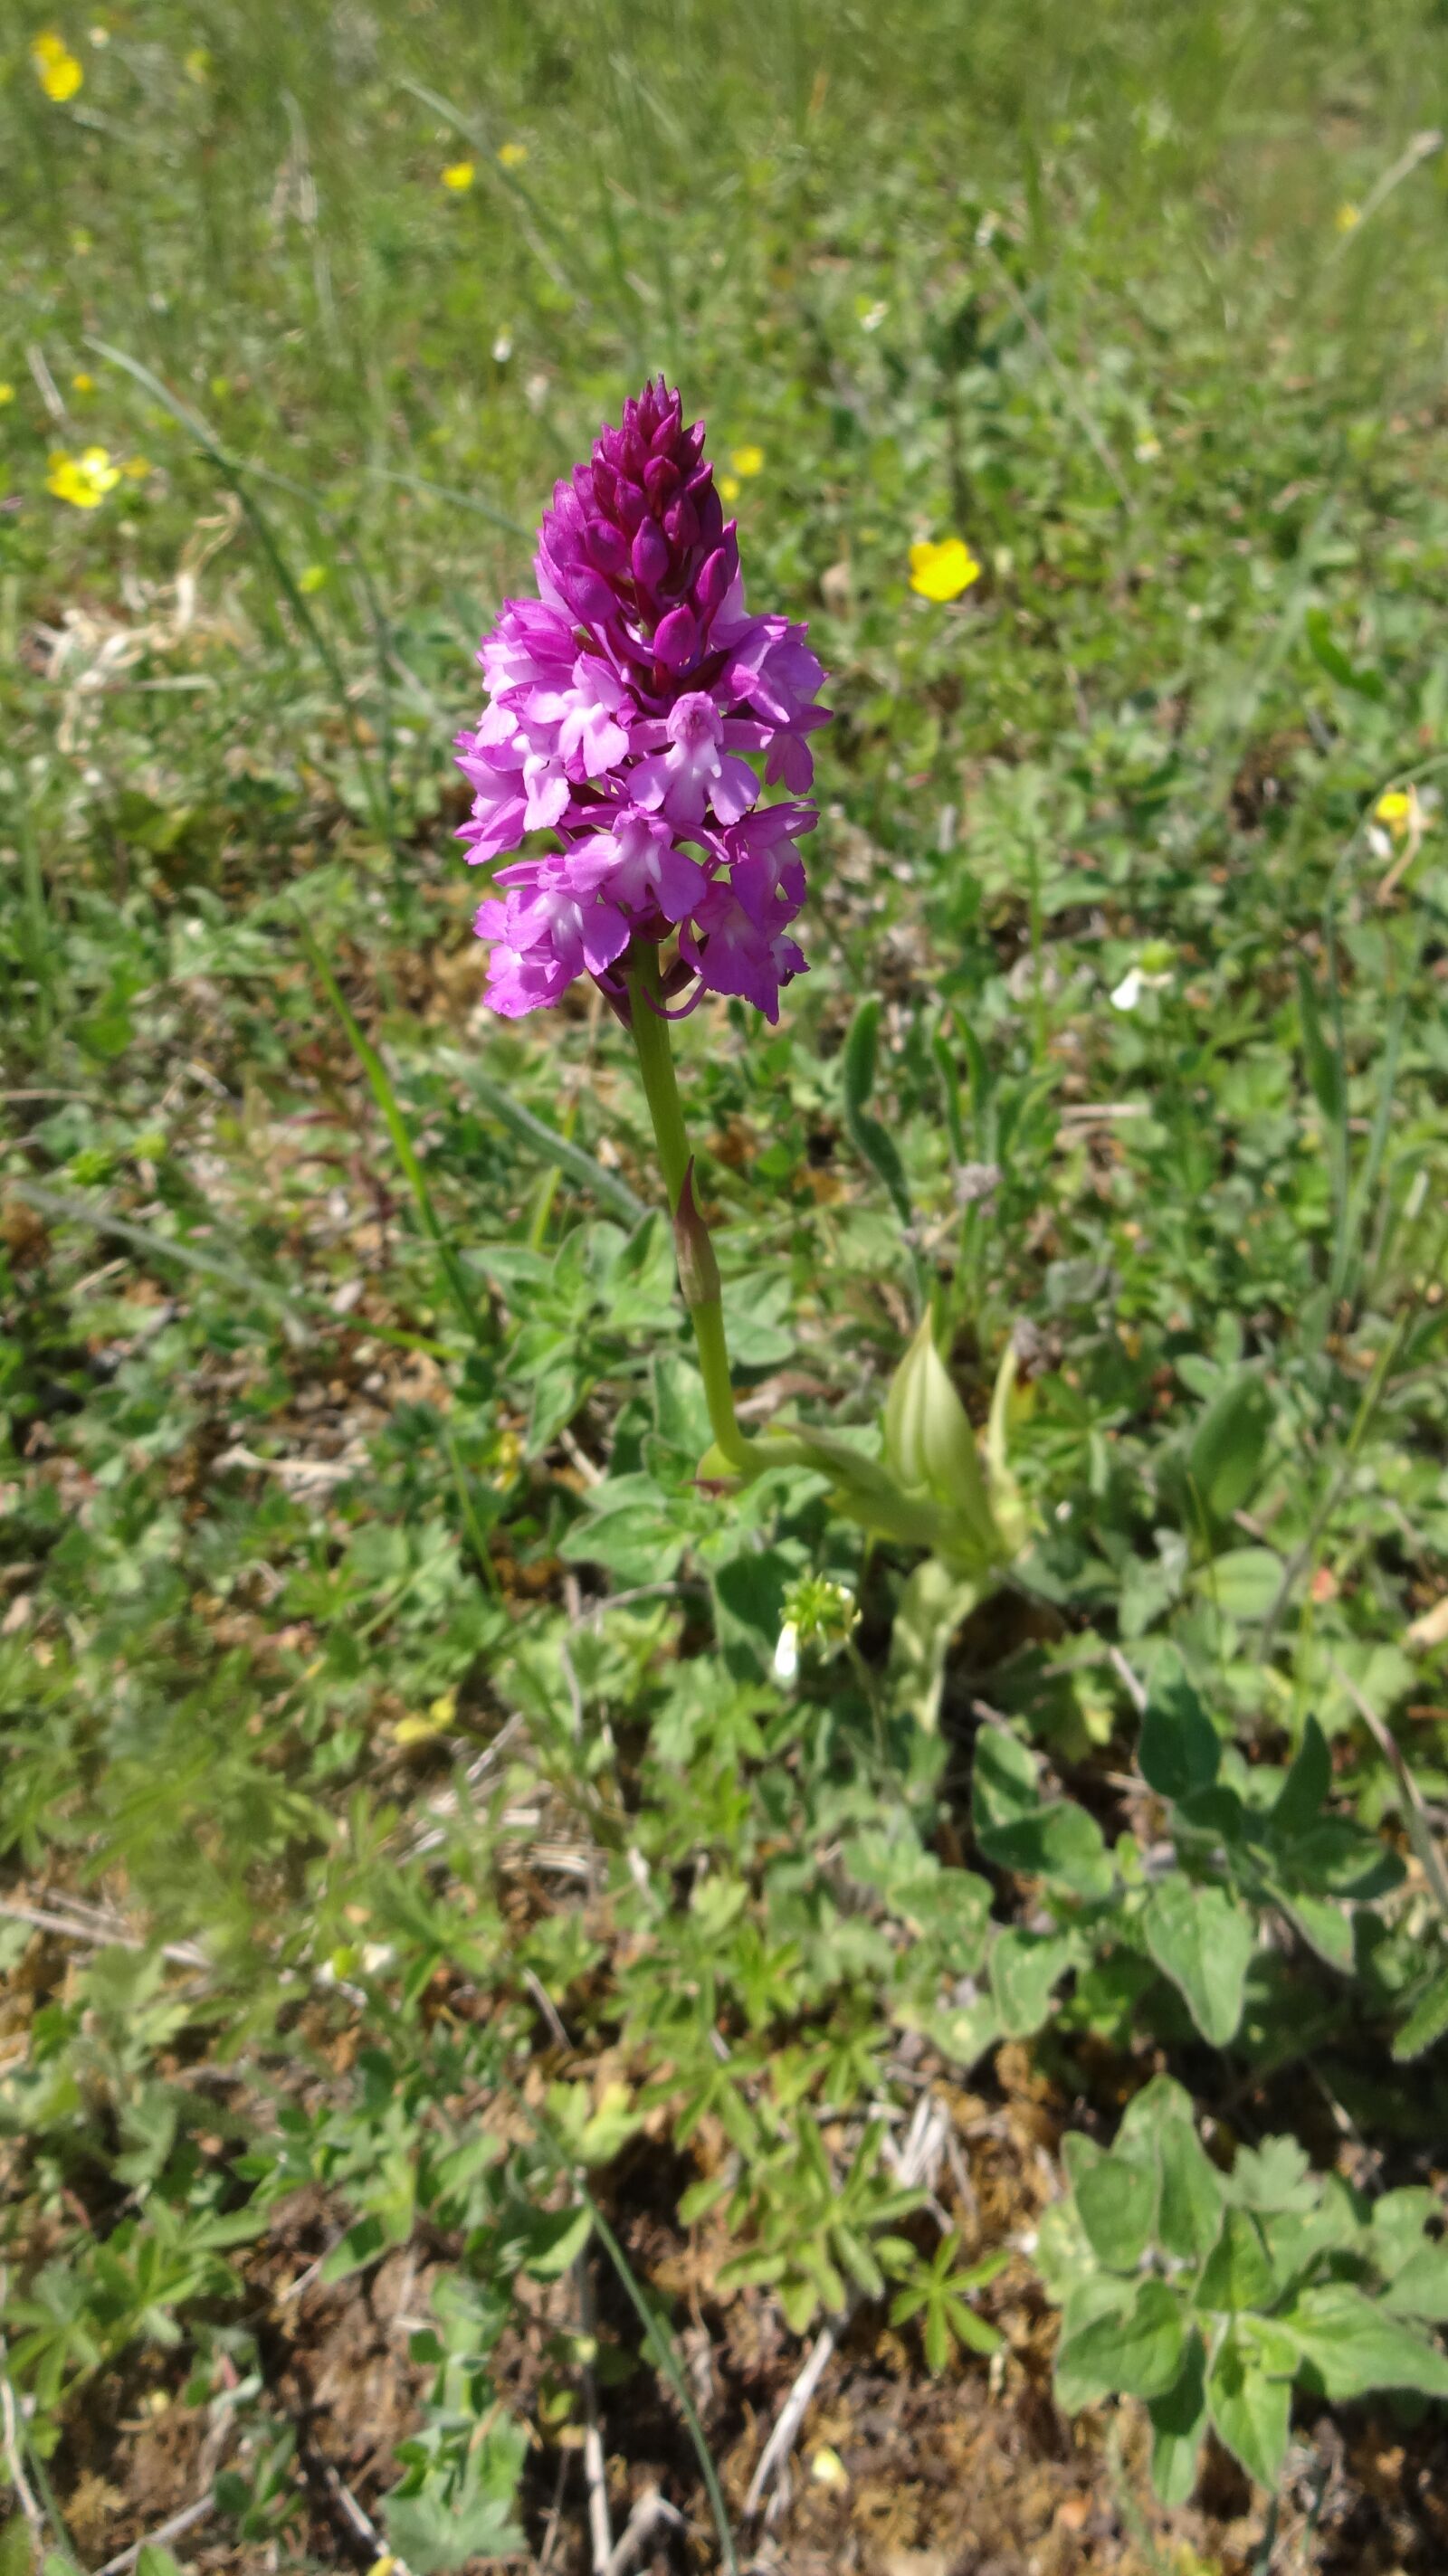 Sony DSC-WX100 sample photo. Anacamptis, pleisweiler, may 2020 photography